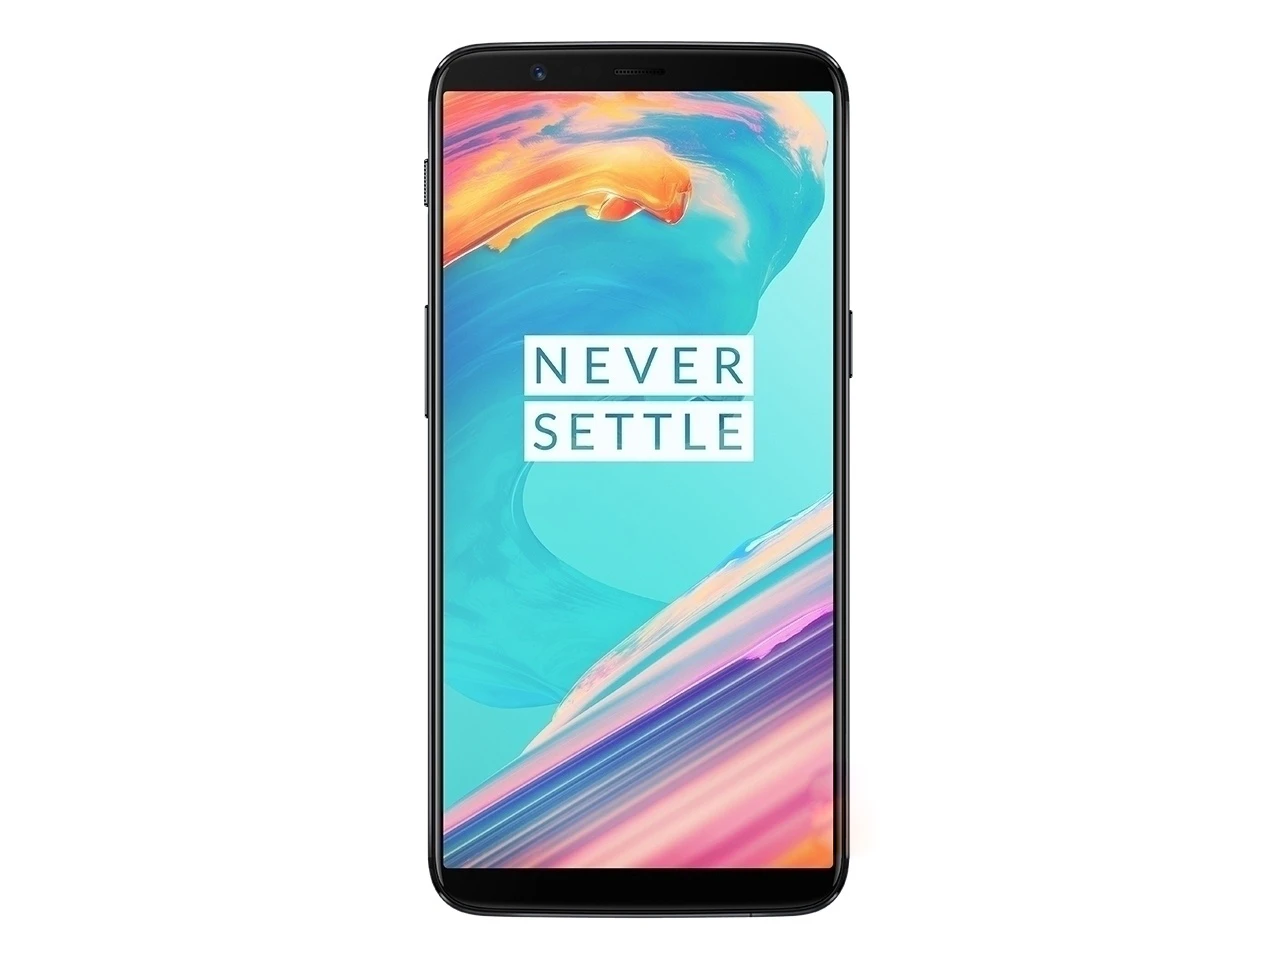 the best oneplus phone Original new Global Rom Oneplus 5T 5 T A5010 4G LTE 6.01" 8GB RAM 128GB Dual SIM Card Full Screen Snapdragon 835 telephone oneplus new cell phone